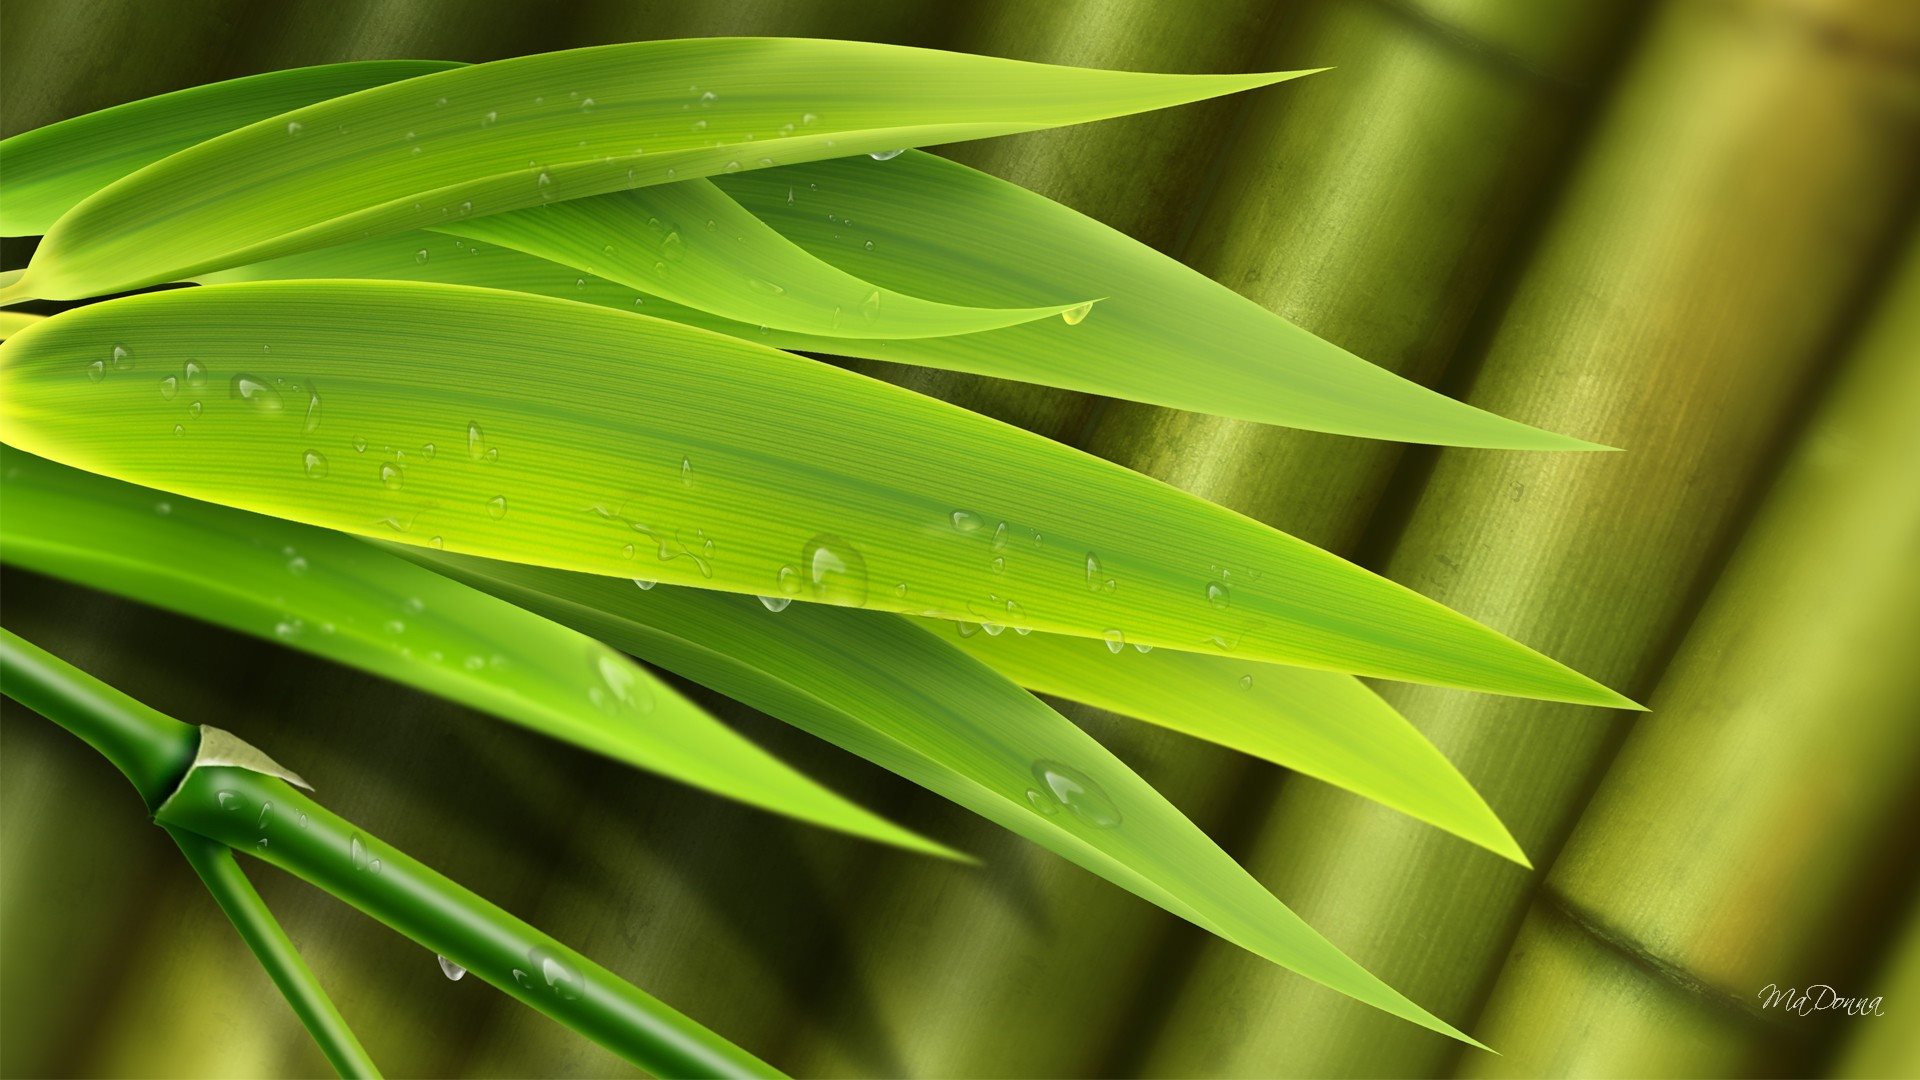 Bamboo Leaves So Bright - [1920 x 1080]